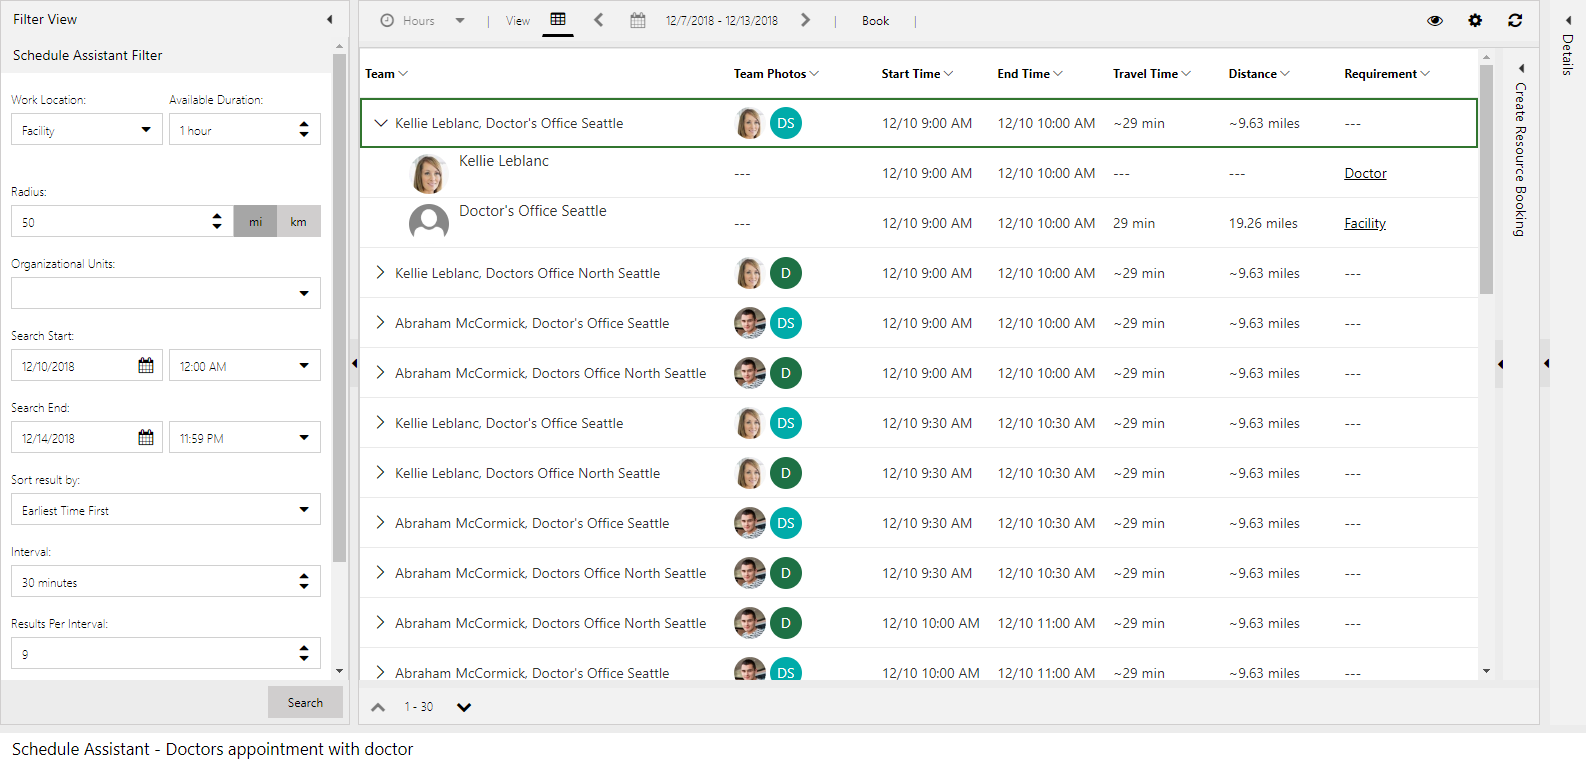 Screenshot of schedule assistant results pairing a resource with a facility resource to meet the requirement group.